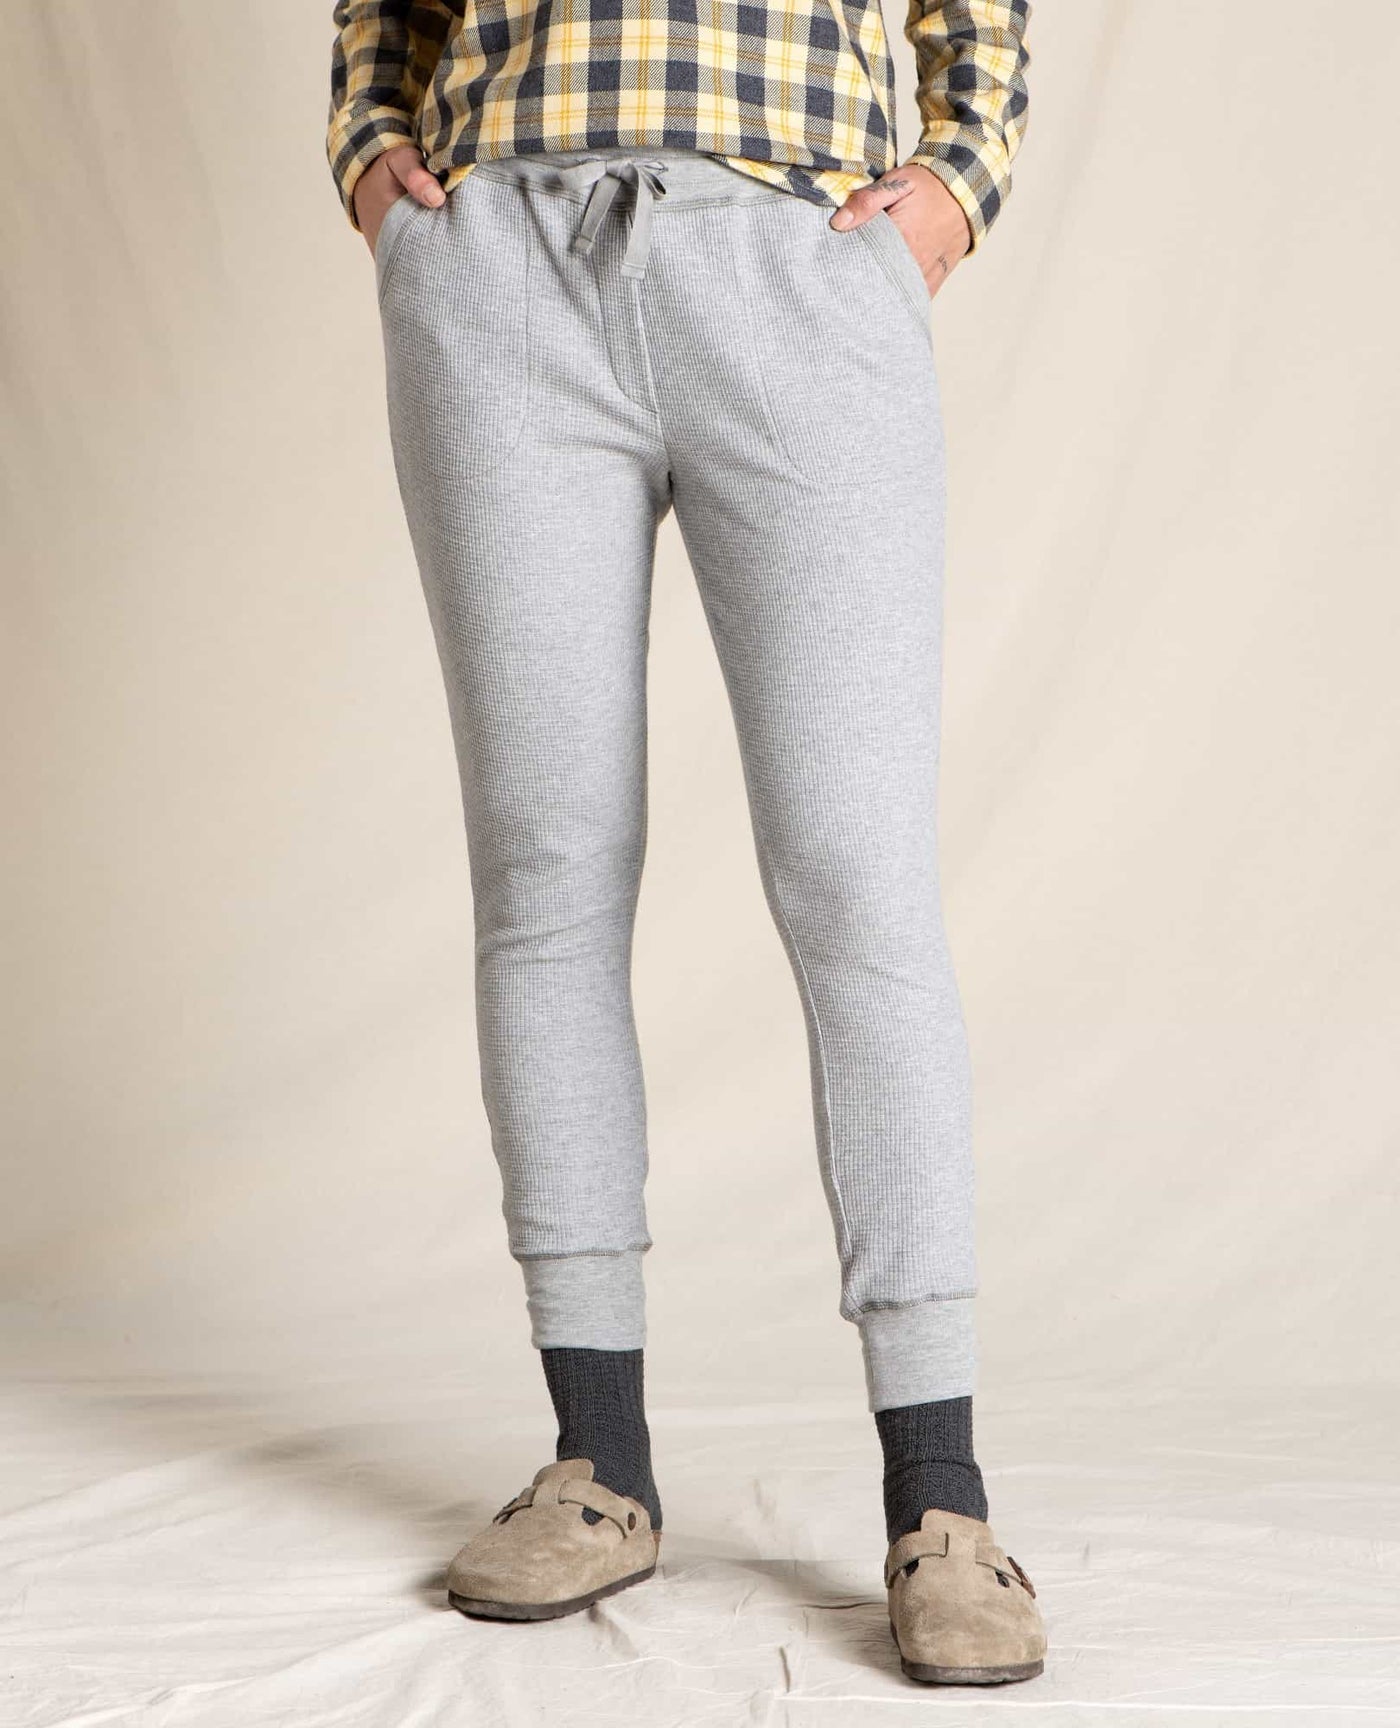 Loungewear - Fancy That & the Roundstone - Fancy That & The Roundstone